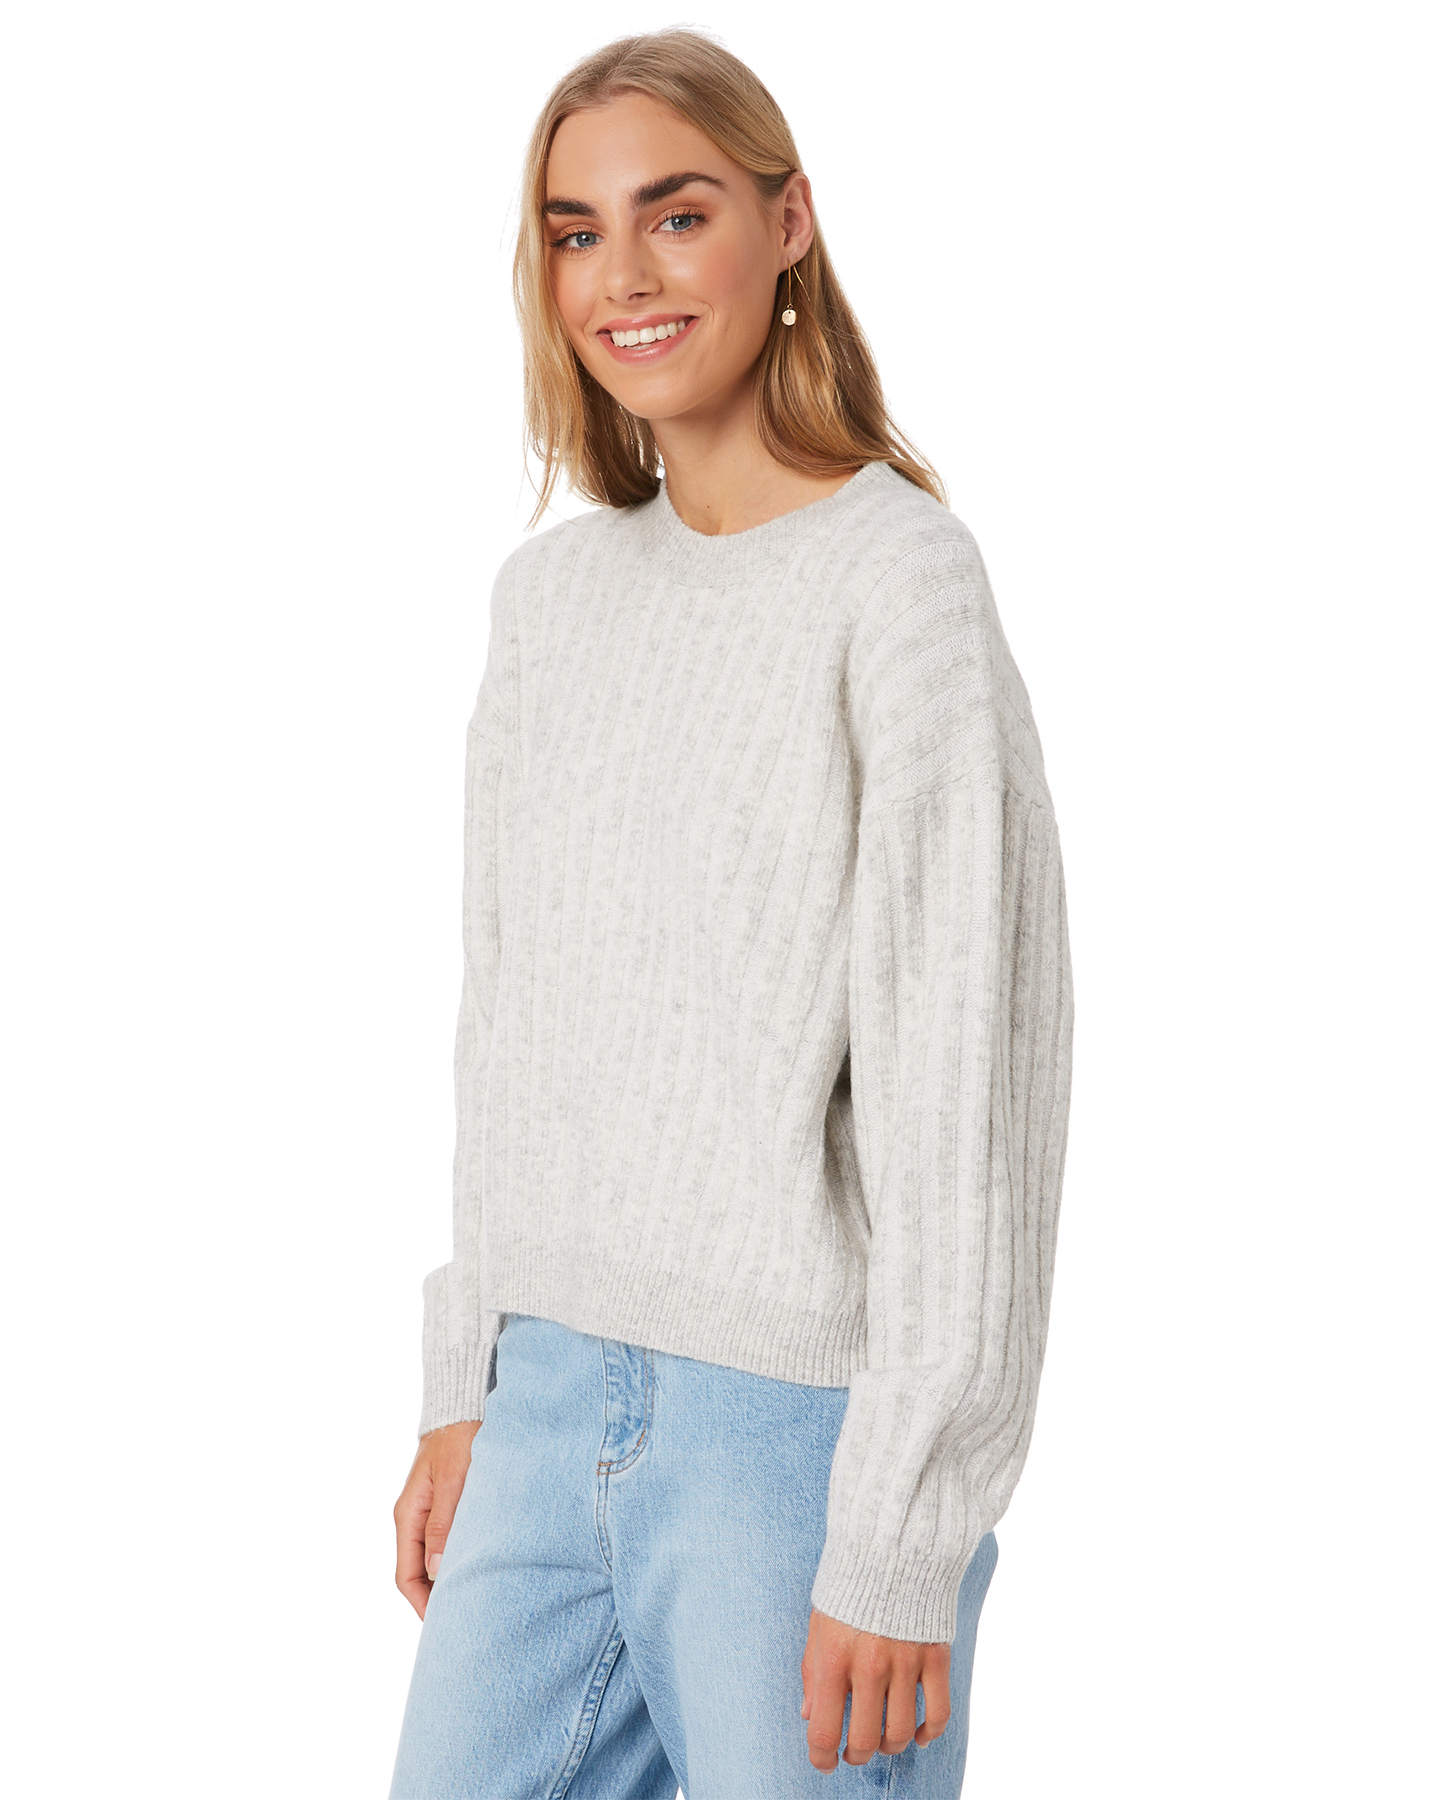 Nude Lucy Madison Knit Jumper - Grey Marle | SurfStitch